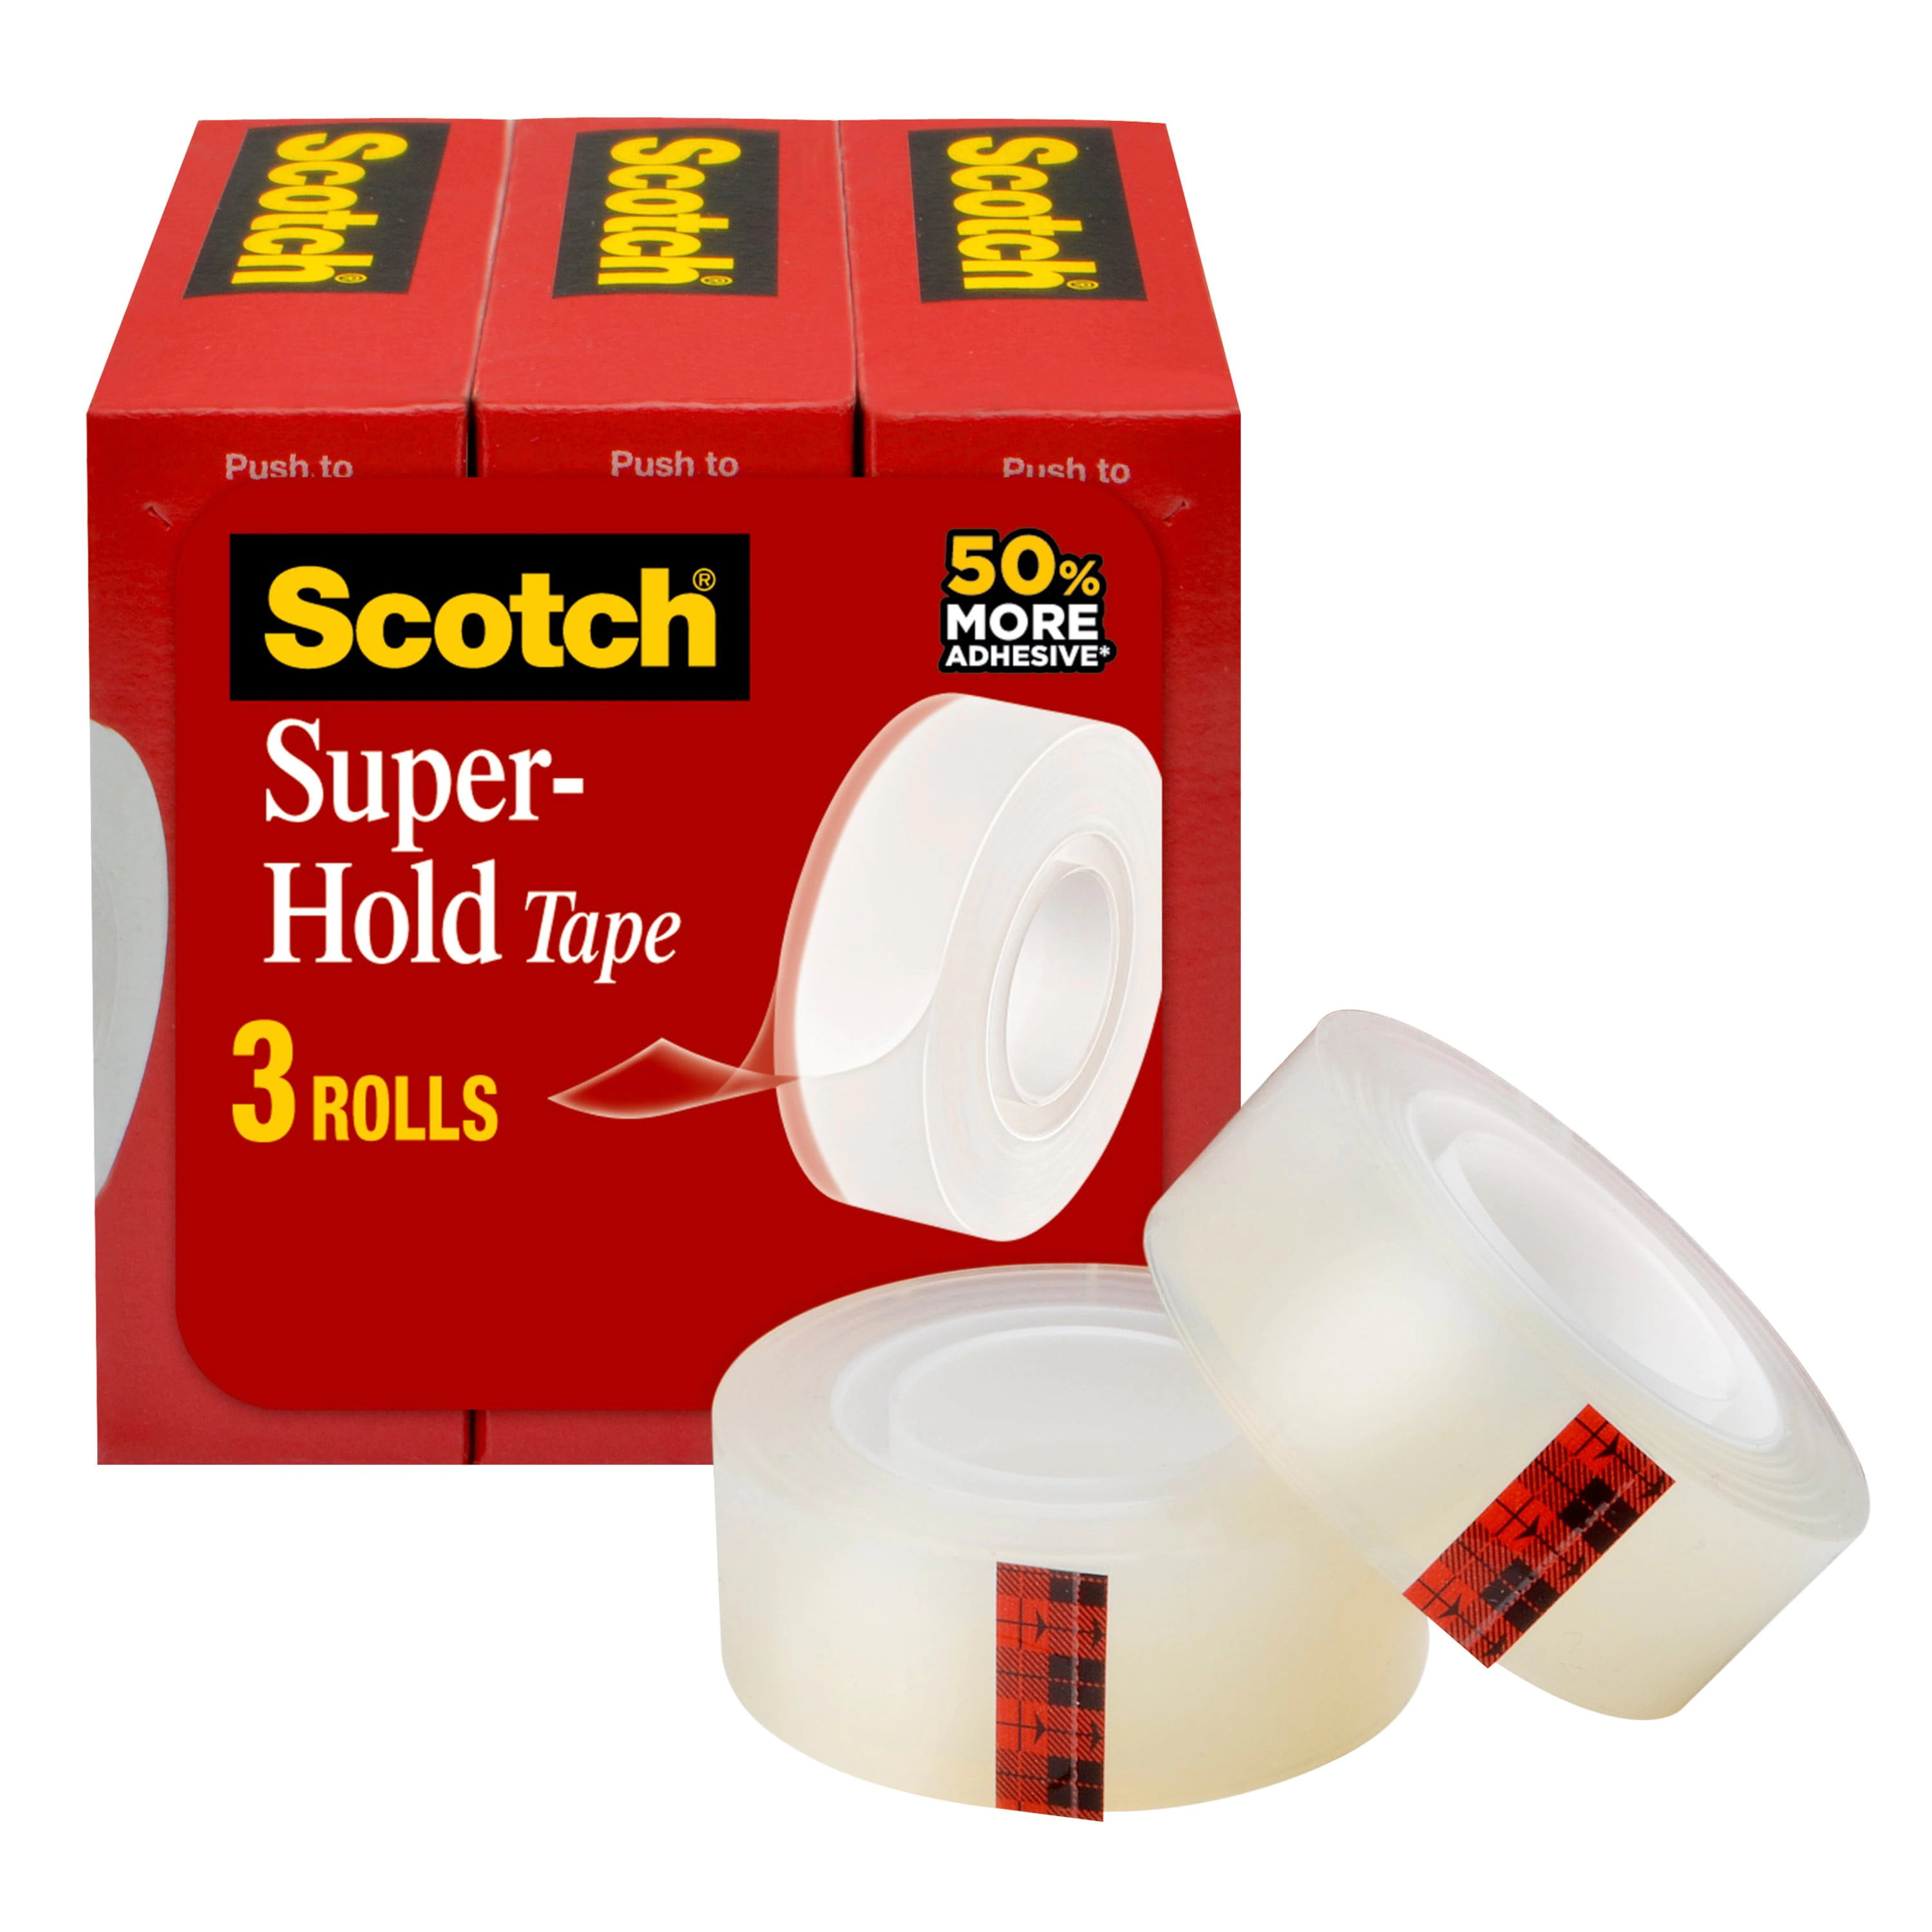 2 Pack 50% More Adhesive Trusted Favorite 10 Rolls Scotch Super-Hold Tape Boxed 3/4 x 1000 Inches Transparent Finish 